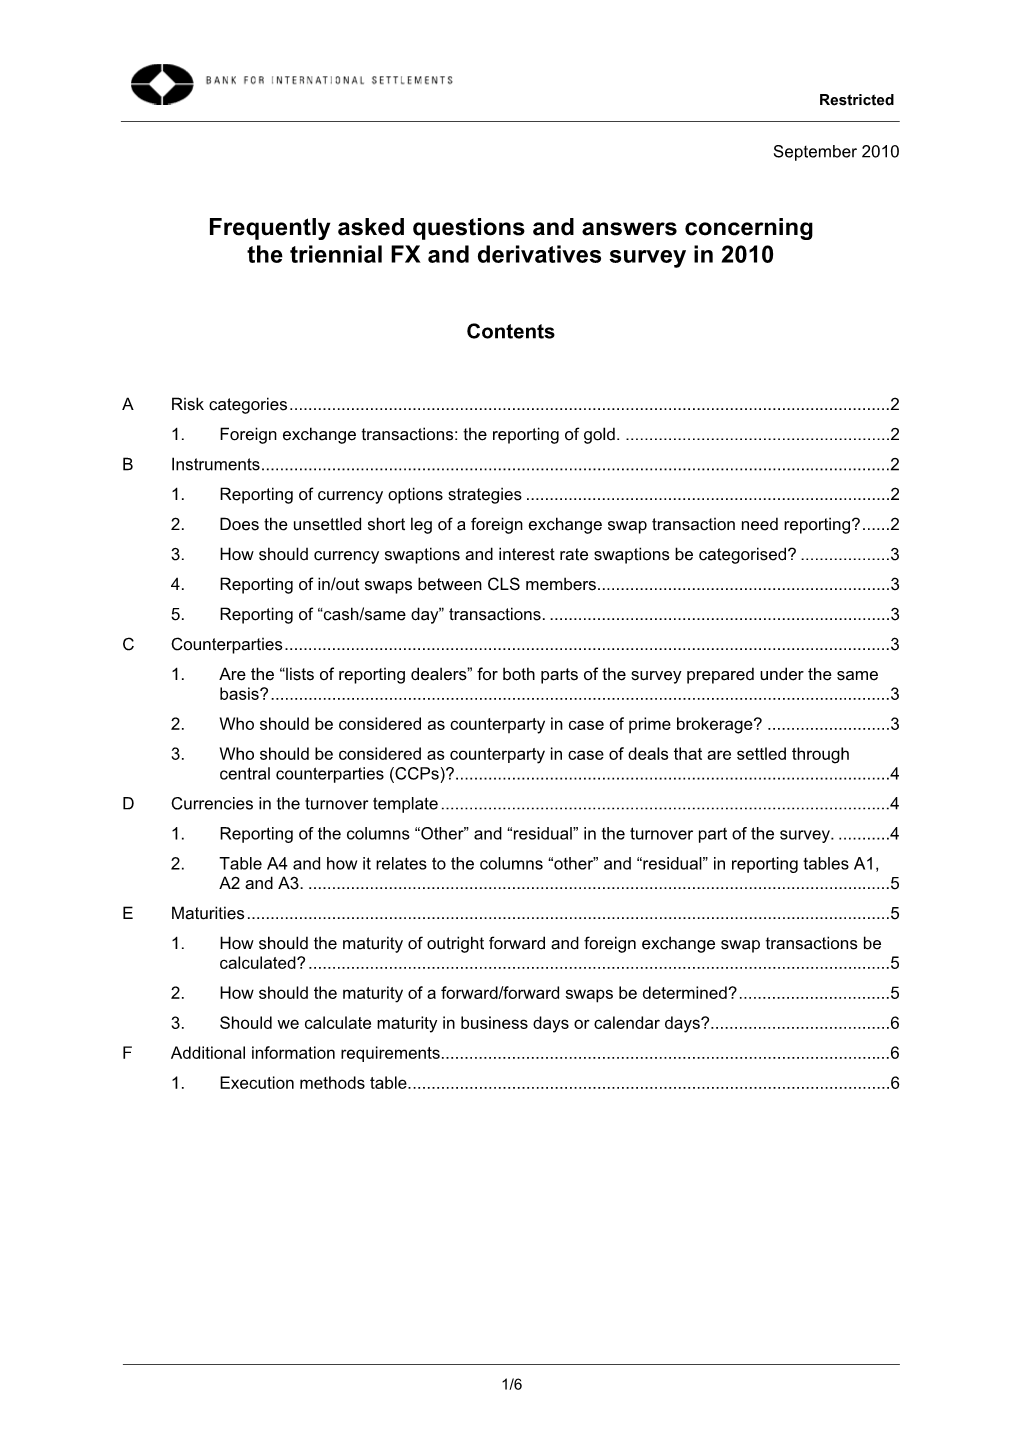 Frequently Asked Questions and Answers Concerning the Triennial FX and Derivatives Survey in 2010